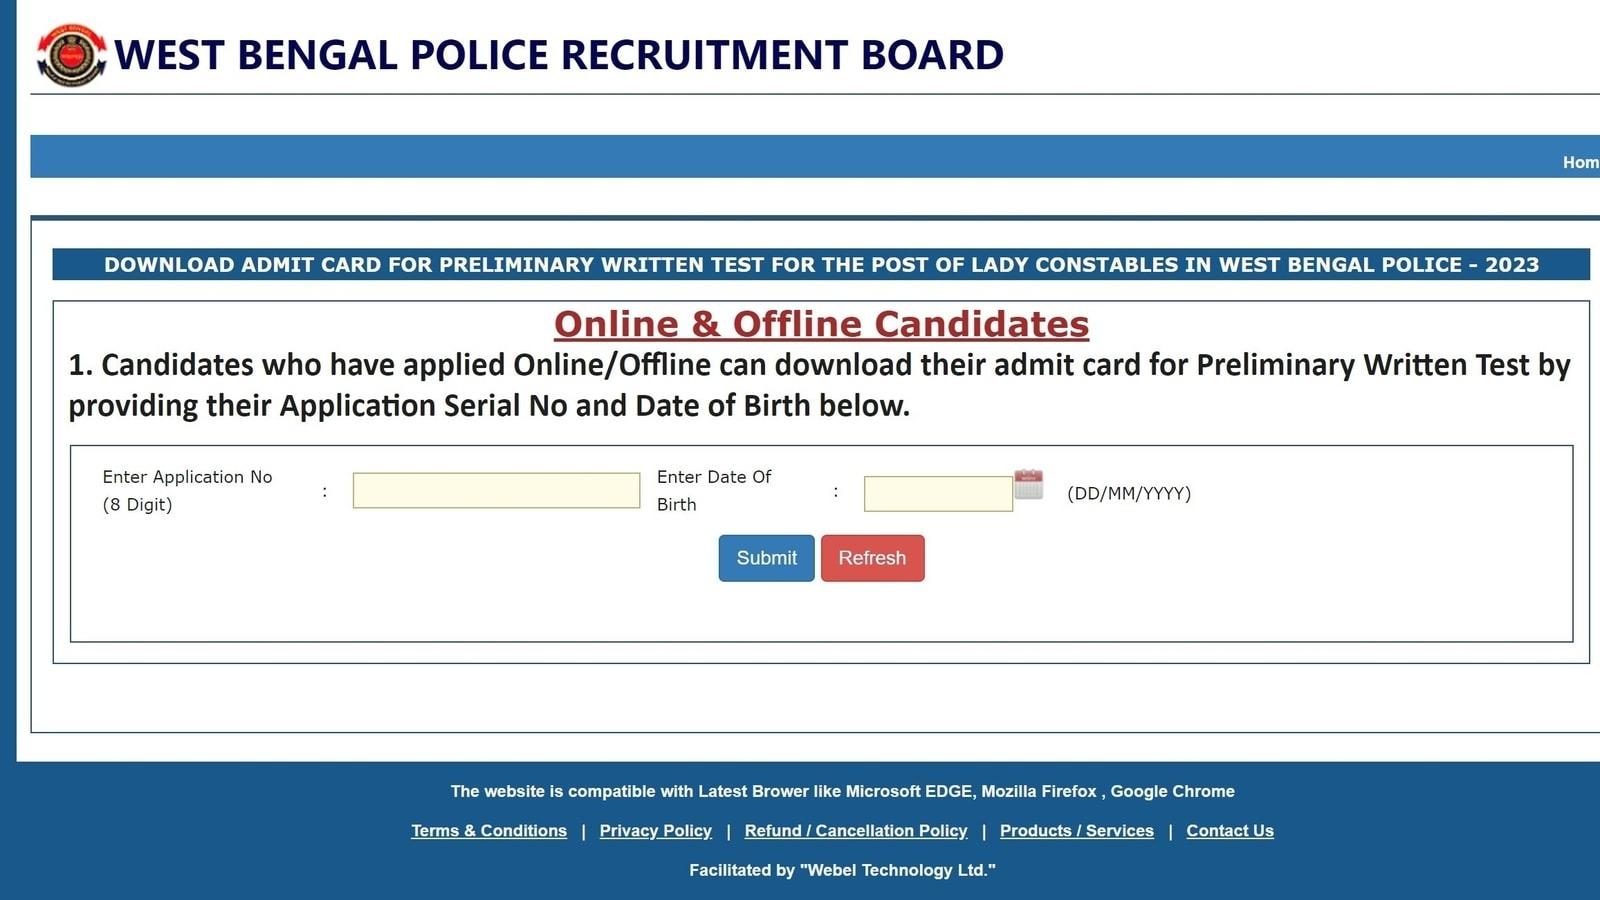 WB police Lady Constable final result out at wbpolice.gov.in; here's the download link